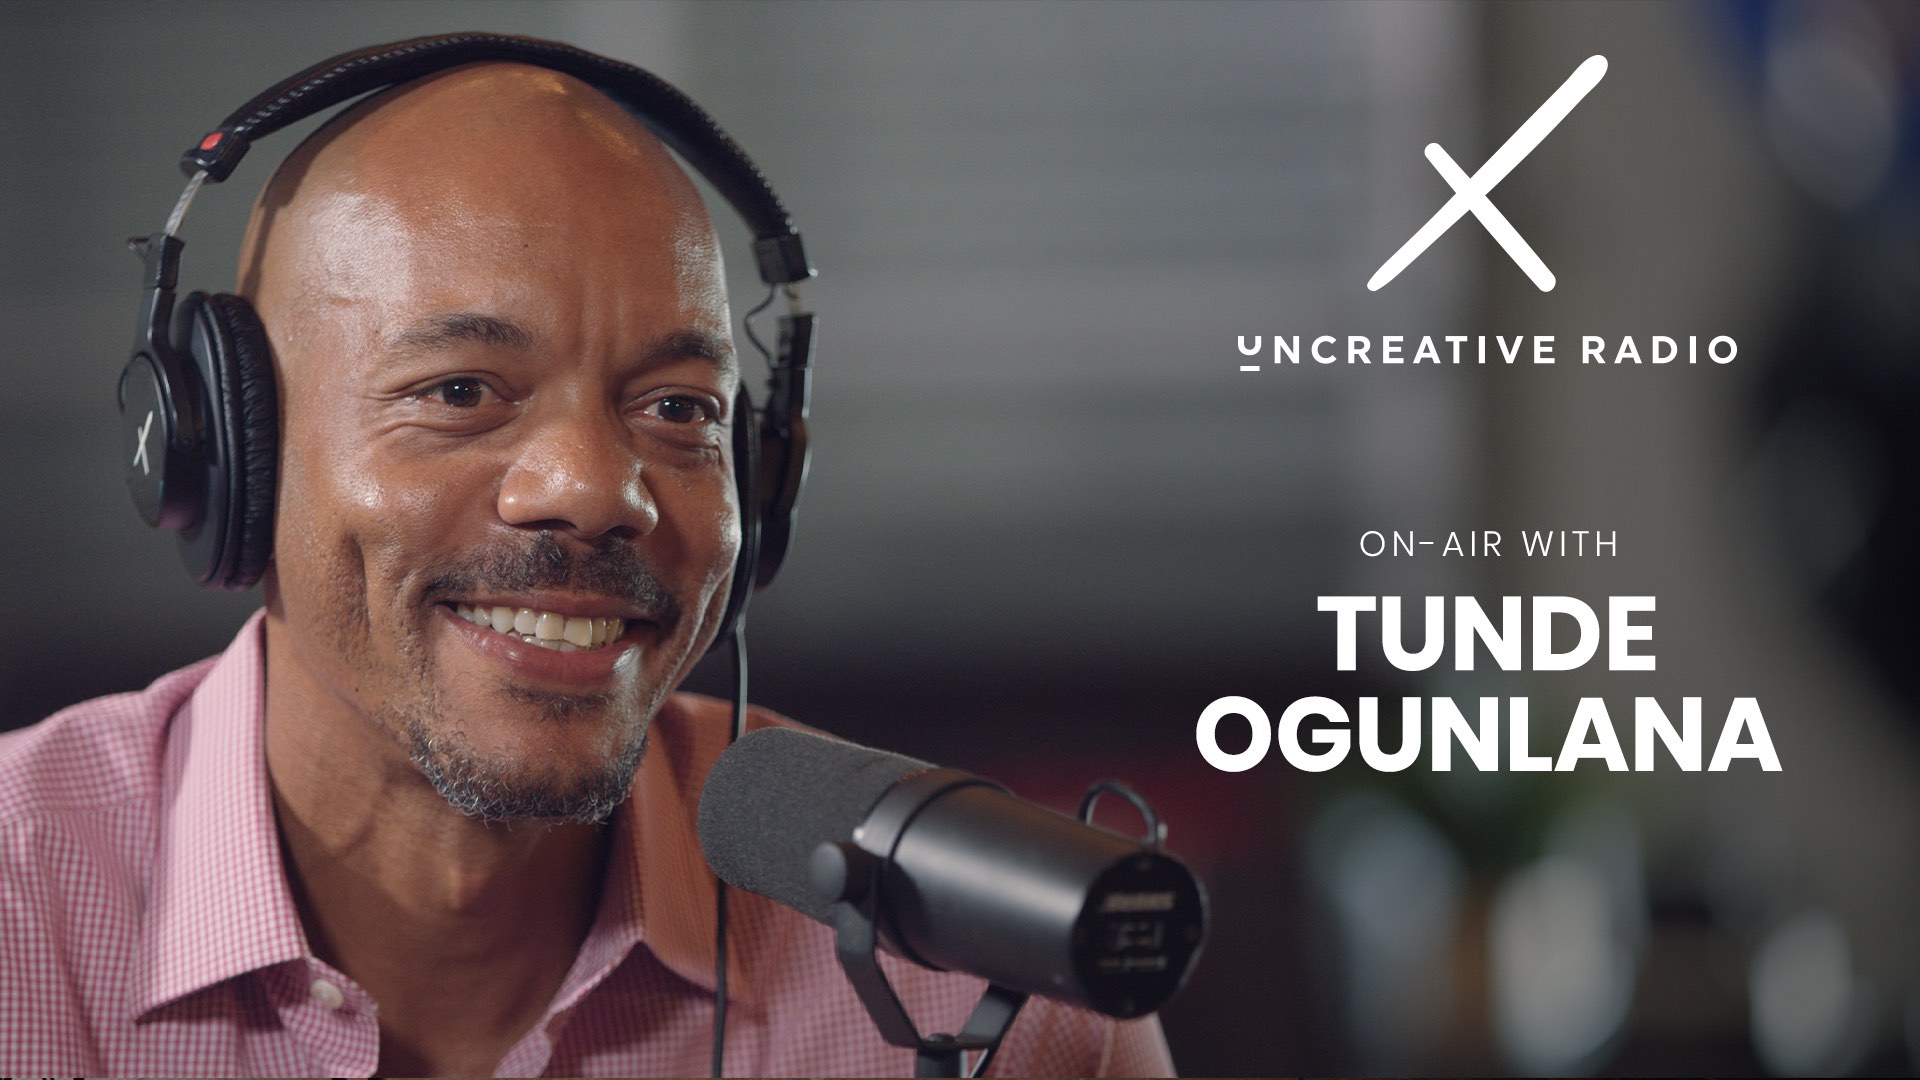 Uncreative Radio on air with Tunde Ogunlana with him wearing red and white checkered shirt and black headphones smiling by microphone